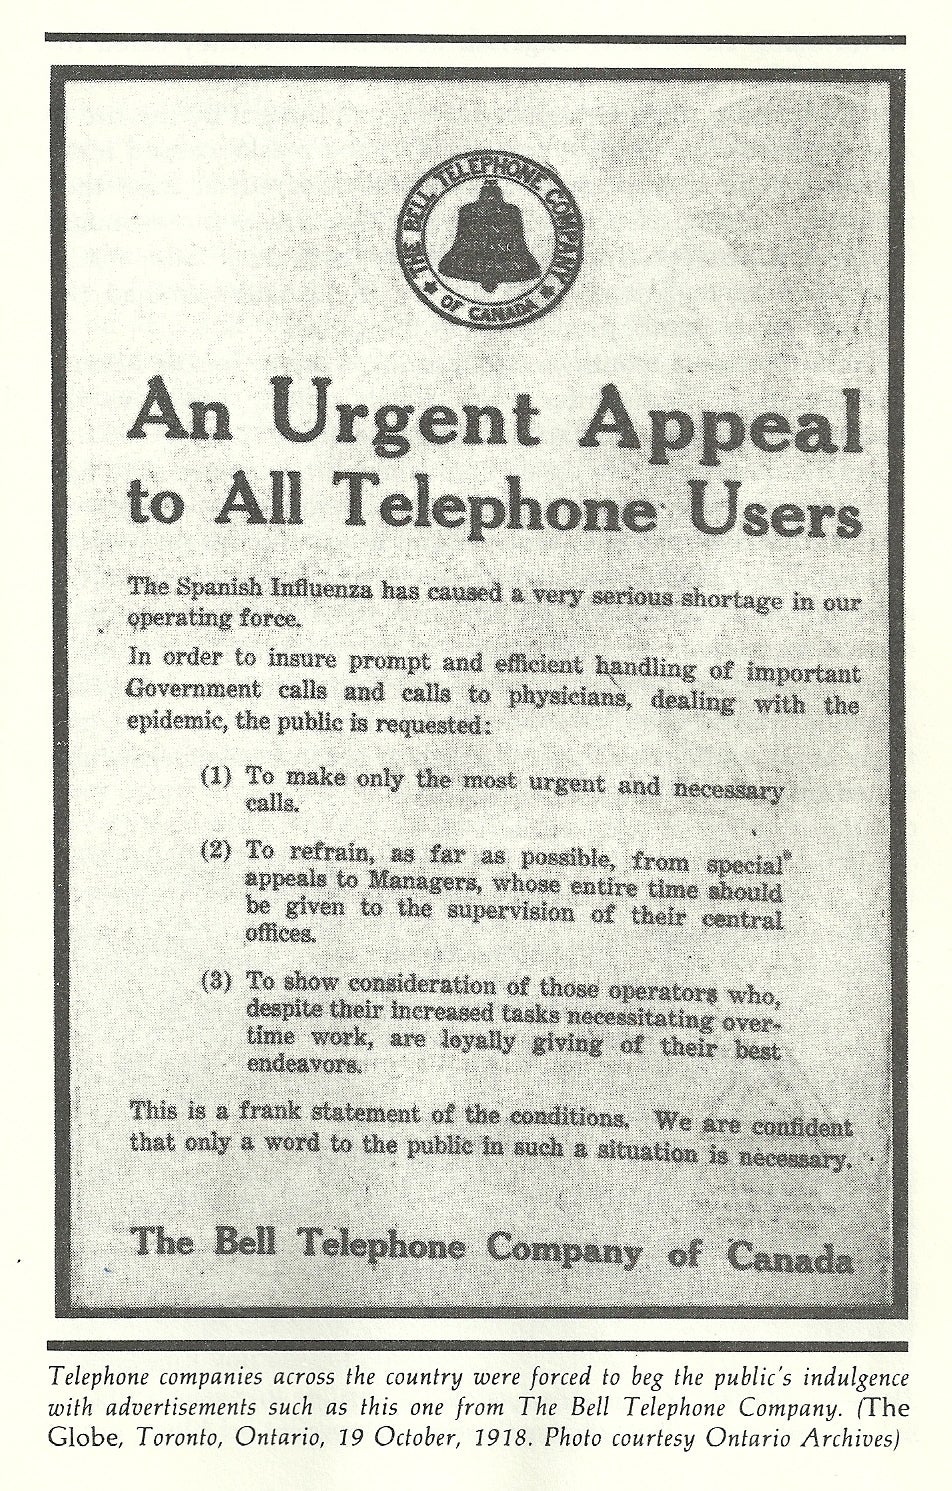 Appeal to telephone users